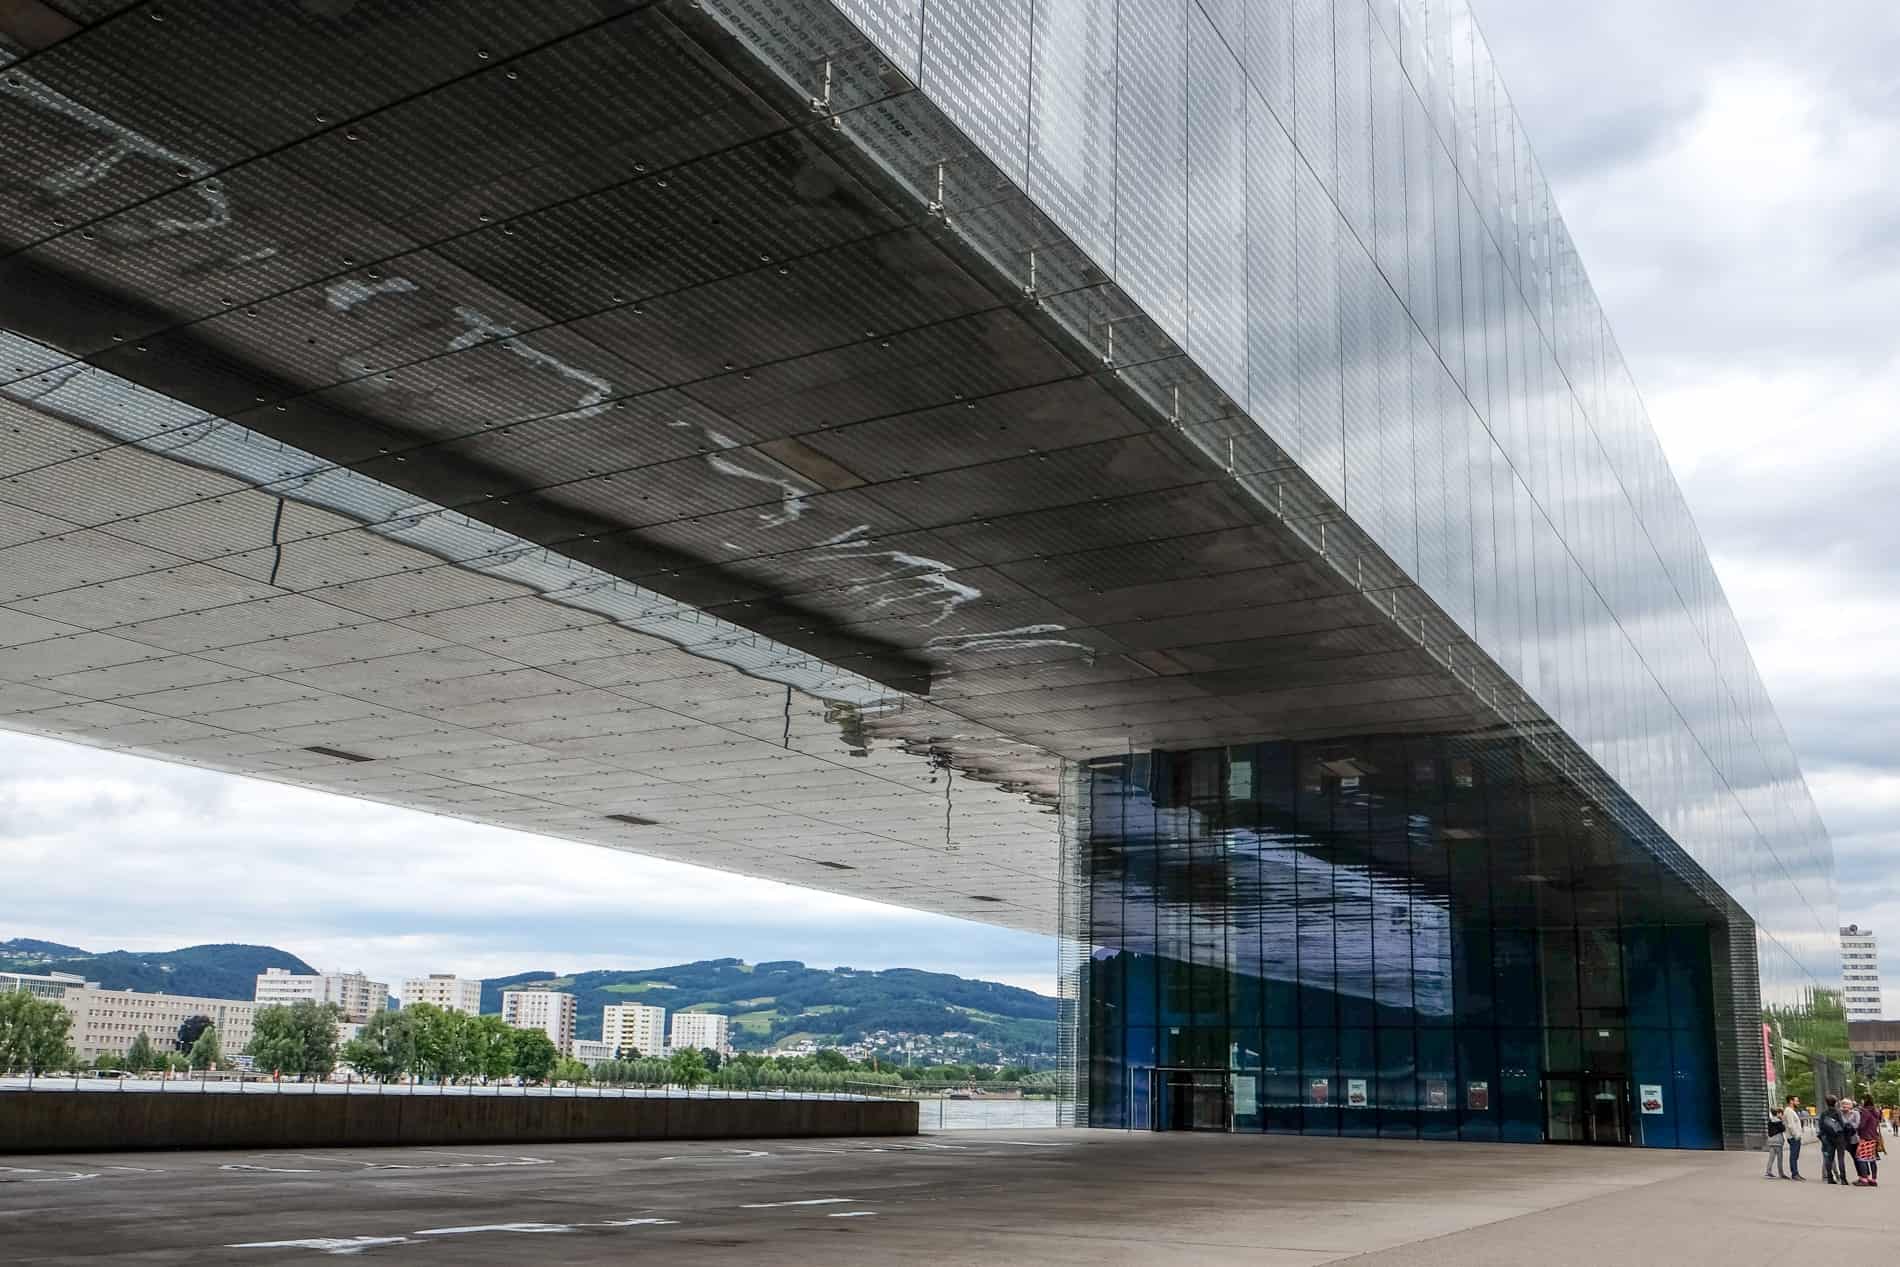 A long, reflective glass art museum building in Linz next to the Danube river. 